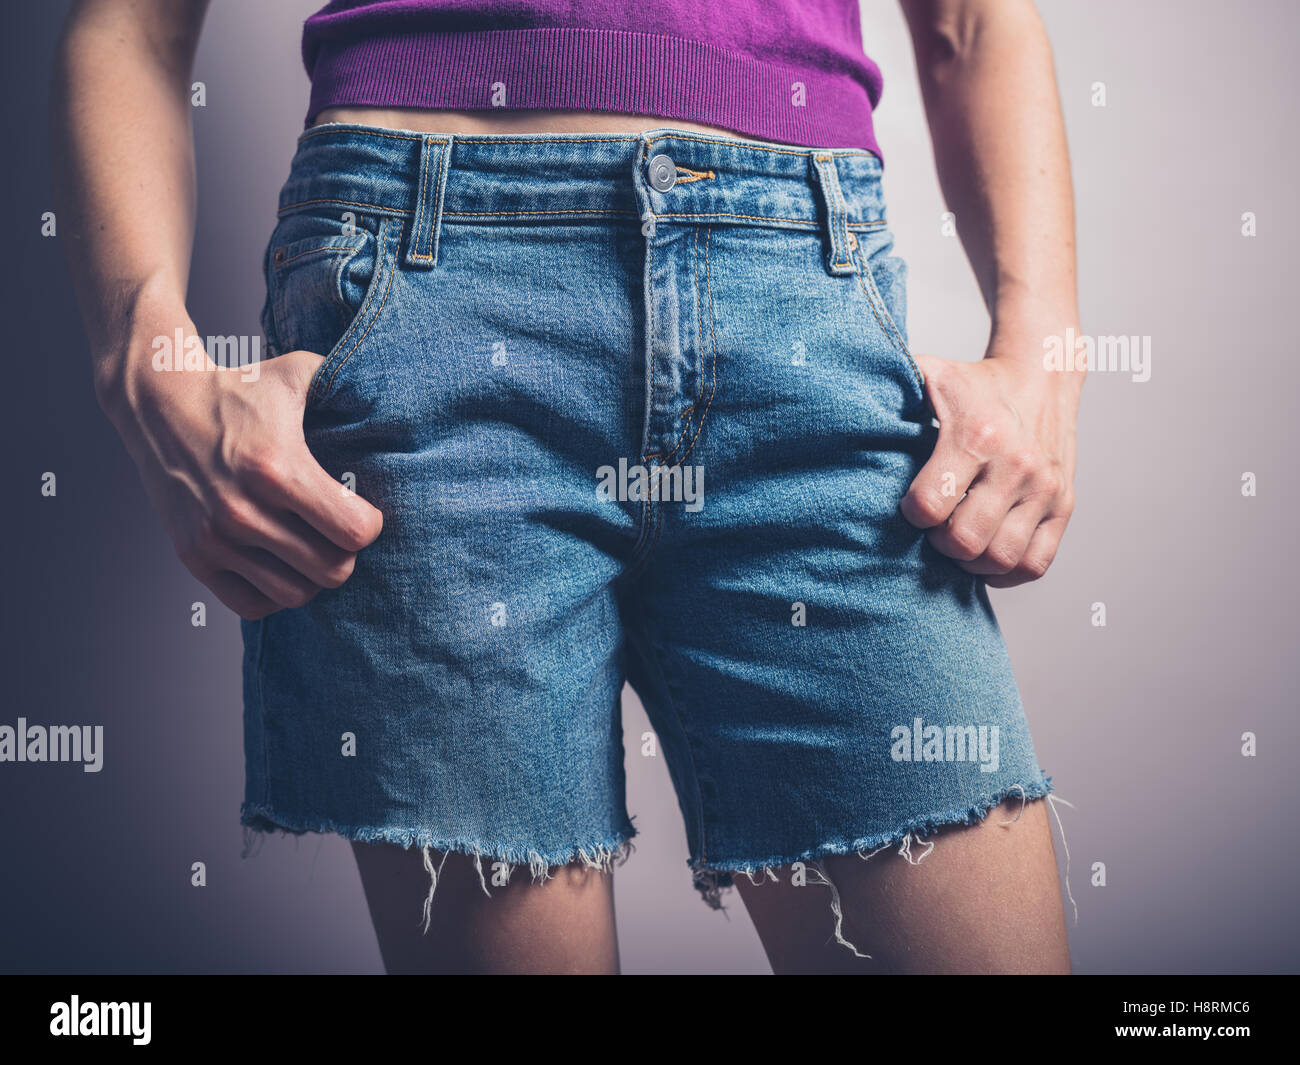 A young woman wearing denim shorts is posing with her hands in her pockets Stock Photo